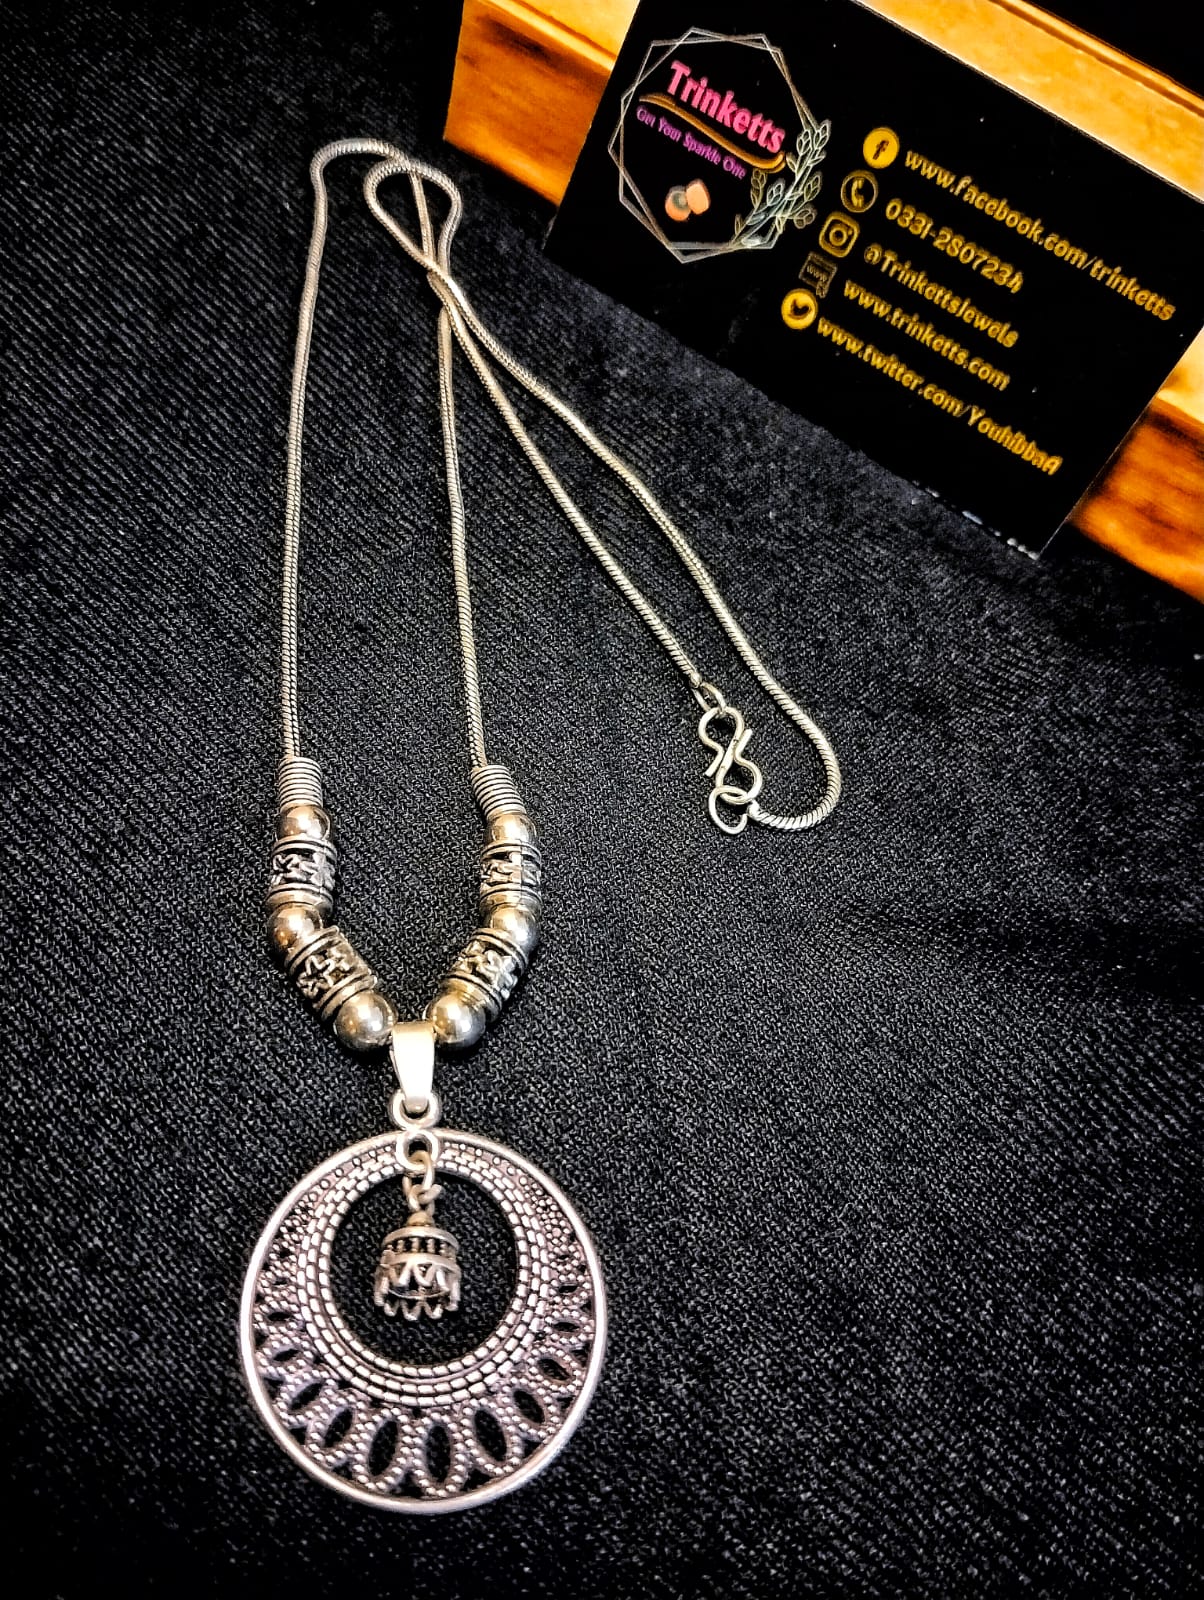 Oxidized Silver Crescent Circle Pendant Necklace with Crescent-Shaped Bottom and Hanging Bell Charm